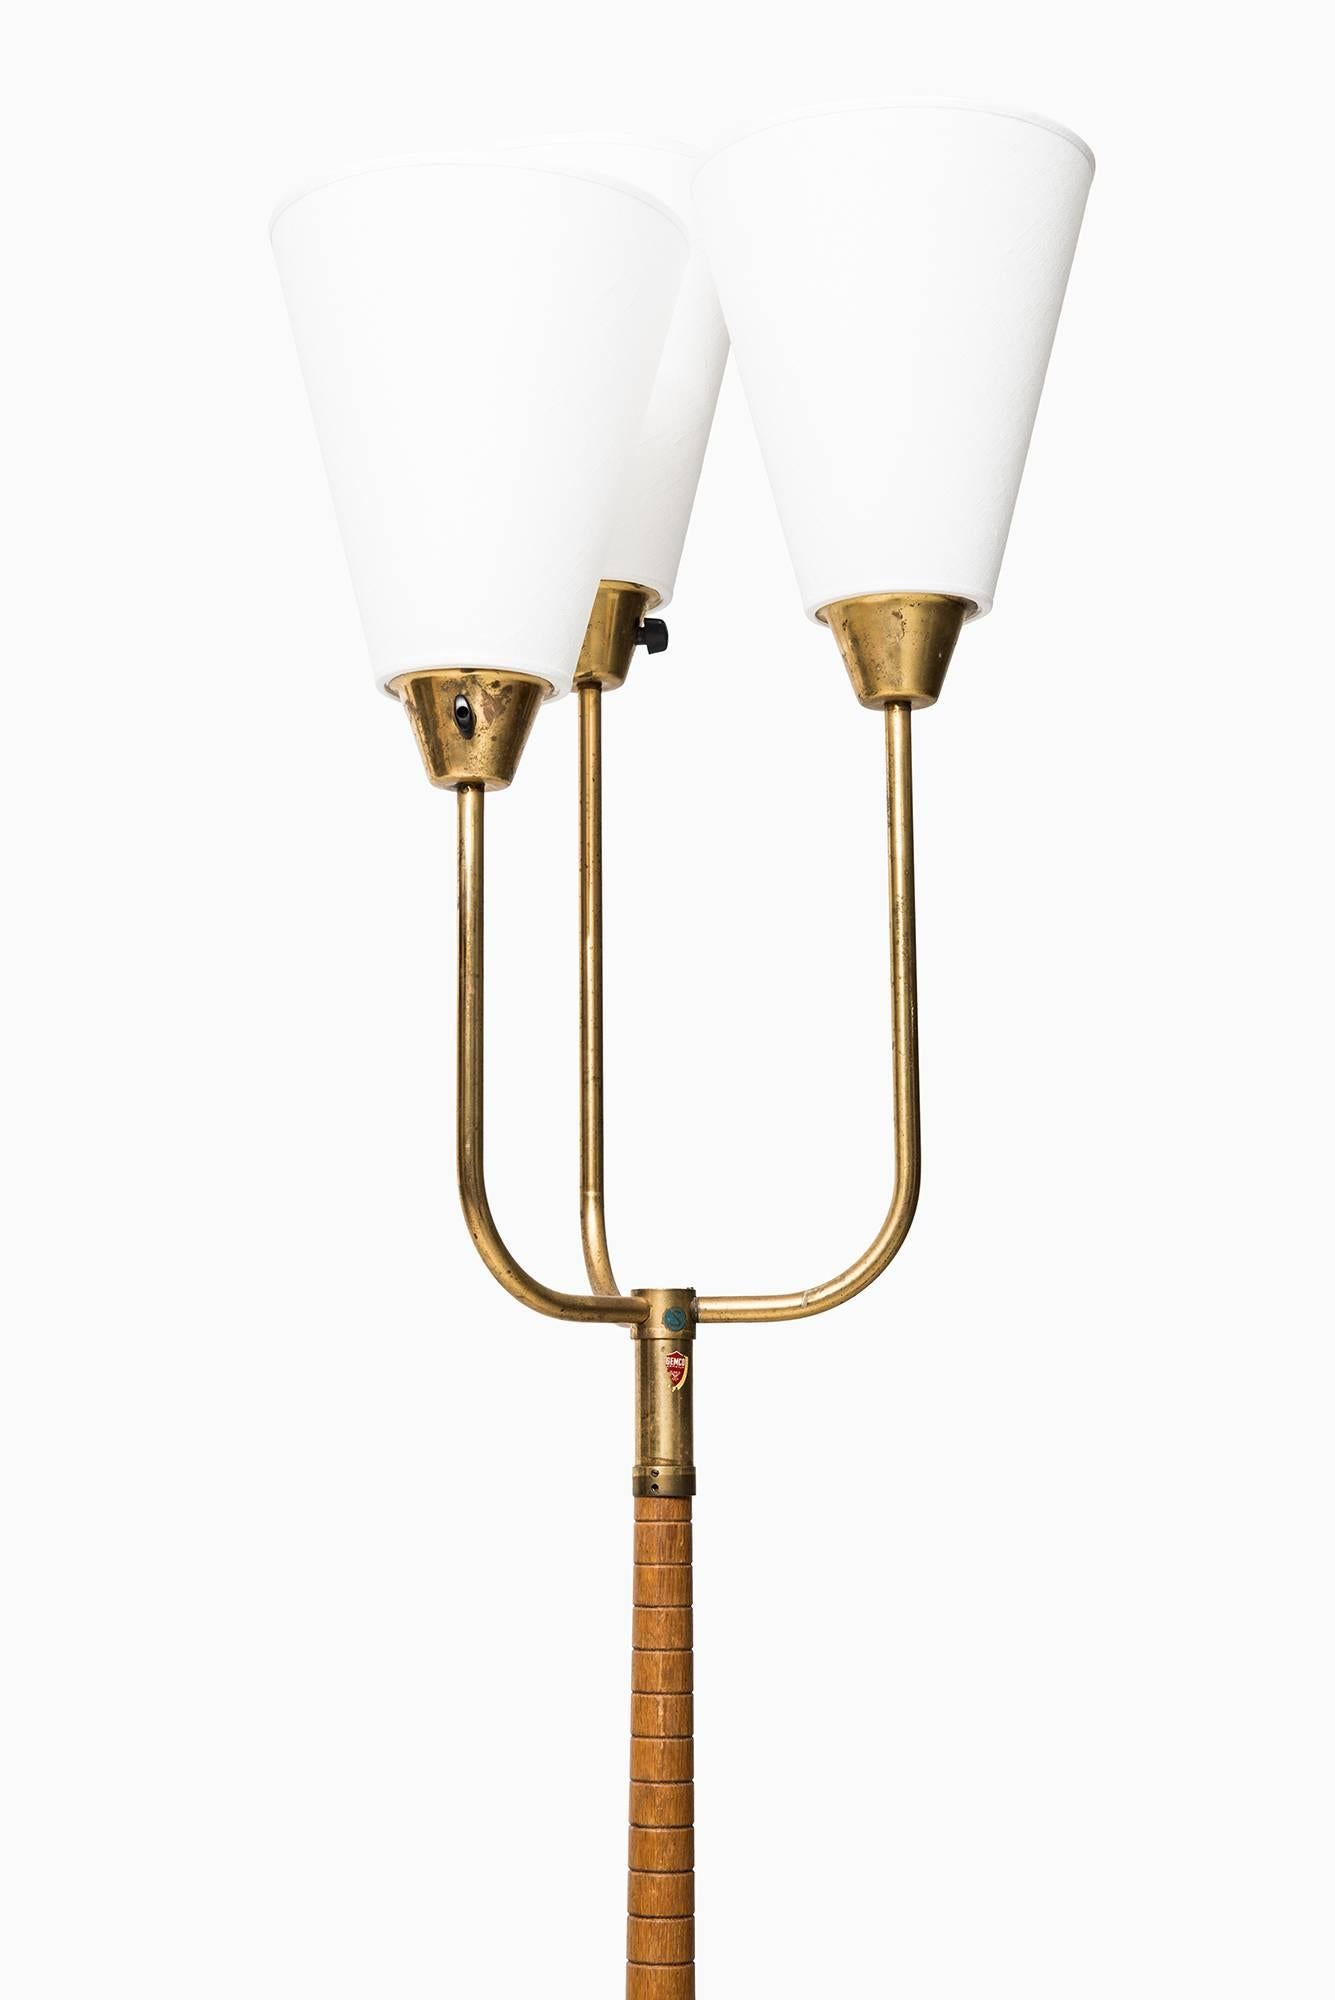 Mid-20th Century Midcentury Uplight with Three Arms Produced in Sweden